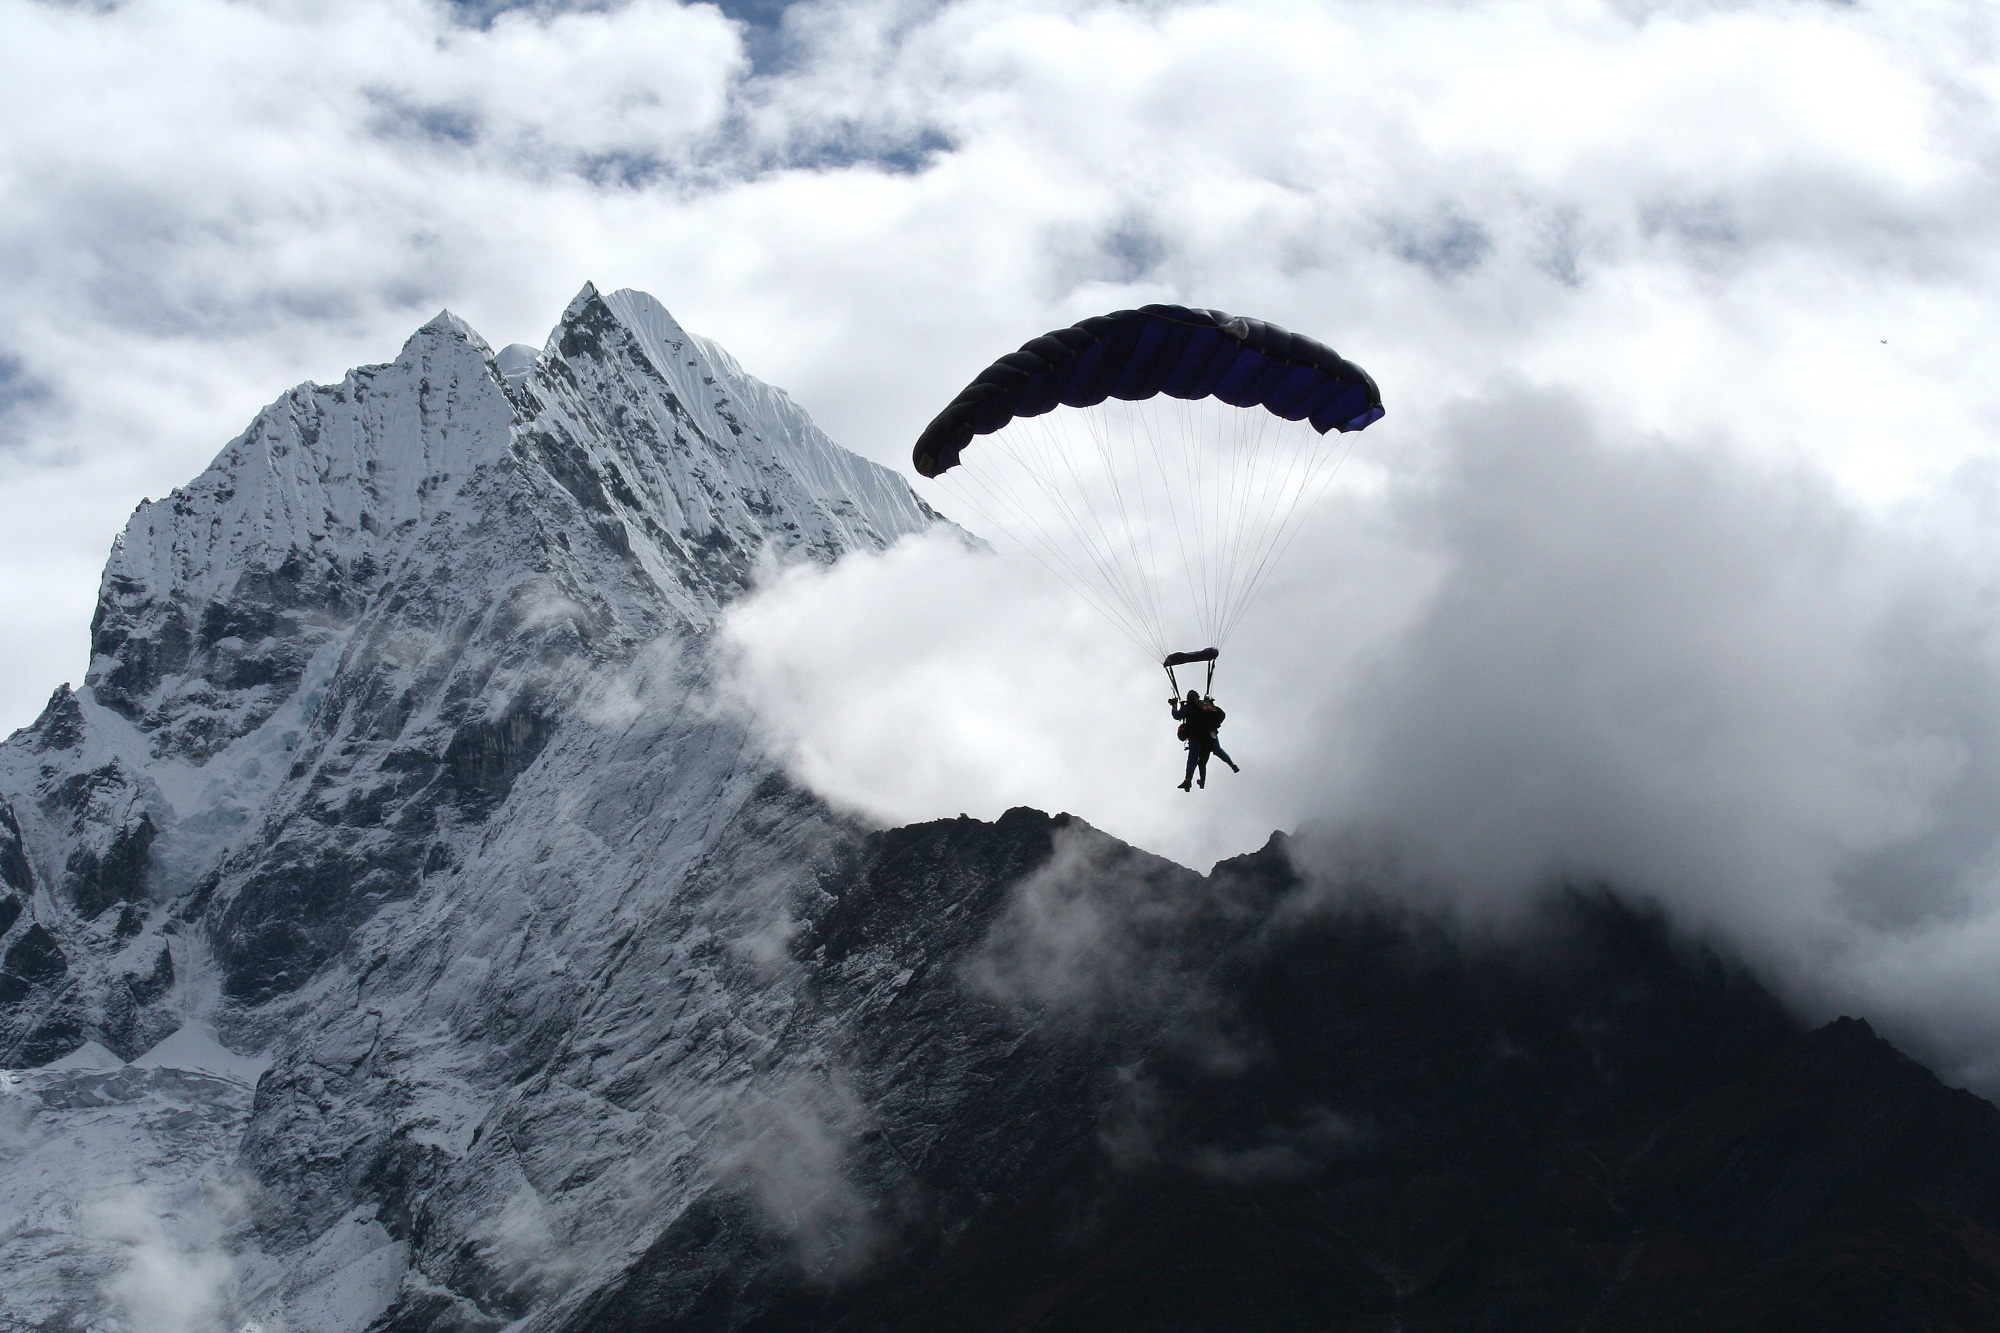 Two skydivers strapped together and silhouetted against clouds with Mt Everest in the background